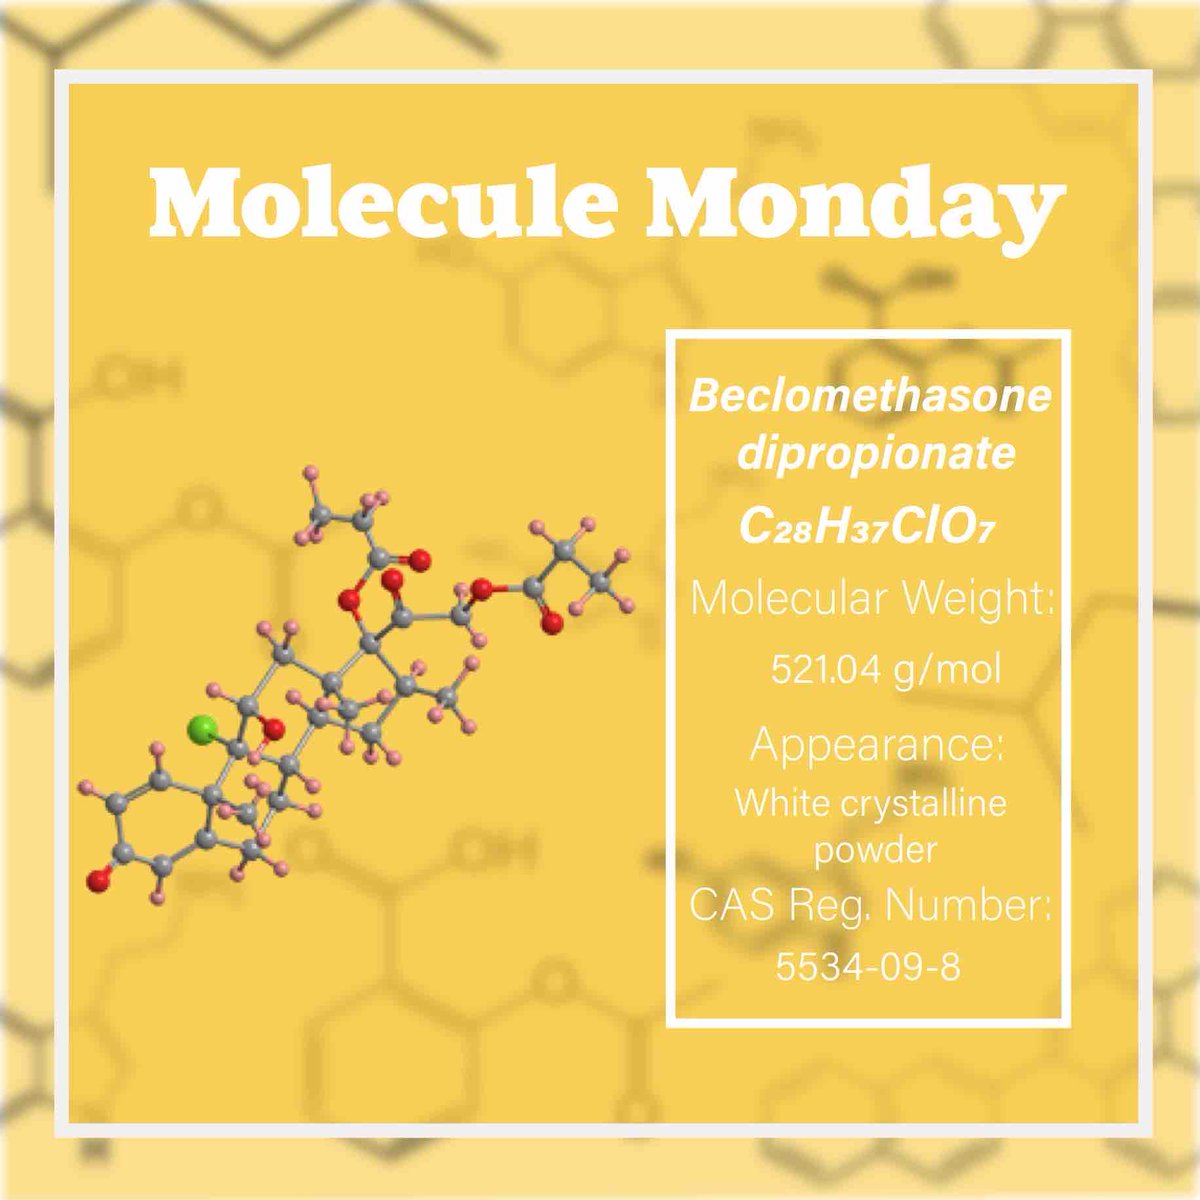 Do you know about Beclomethasone dipropionate, which is a versatile medication? Learn more about this molecule at acs.org/molecule-of-th…. Images used in this post are from asc.org.